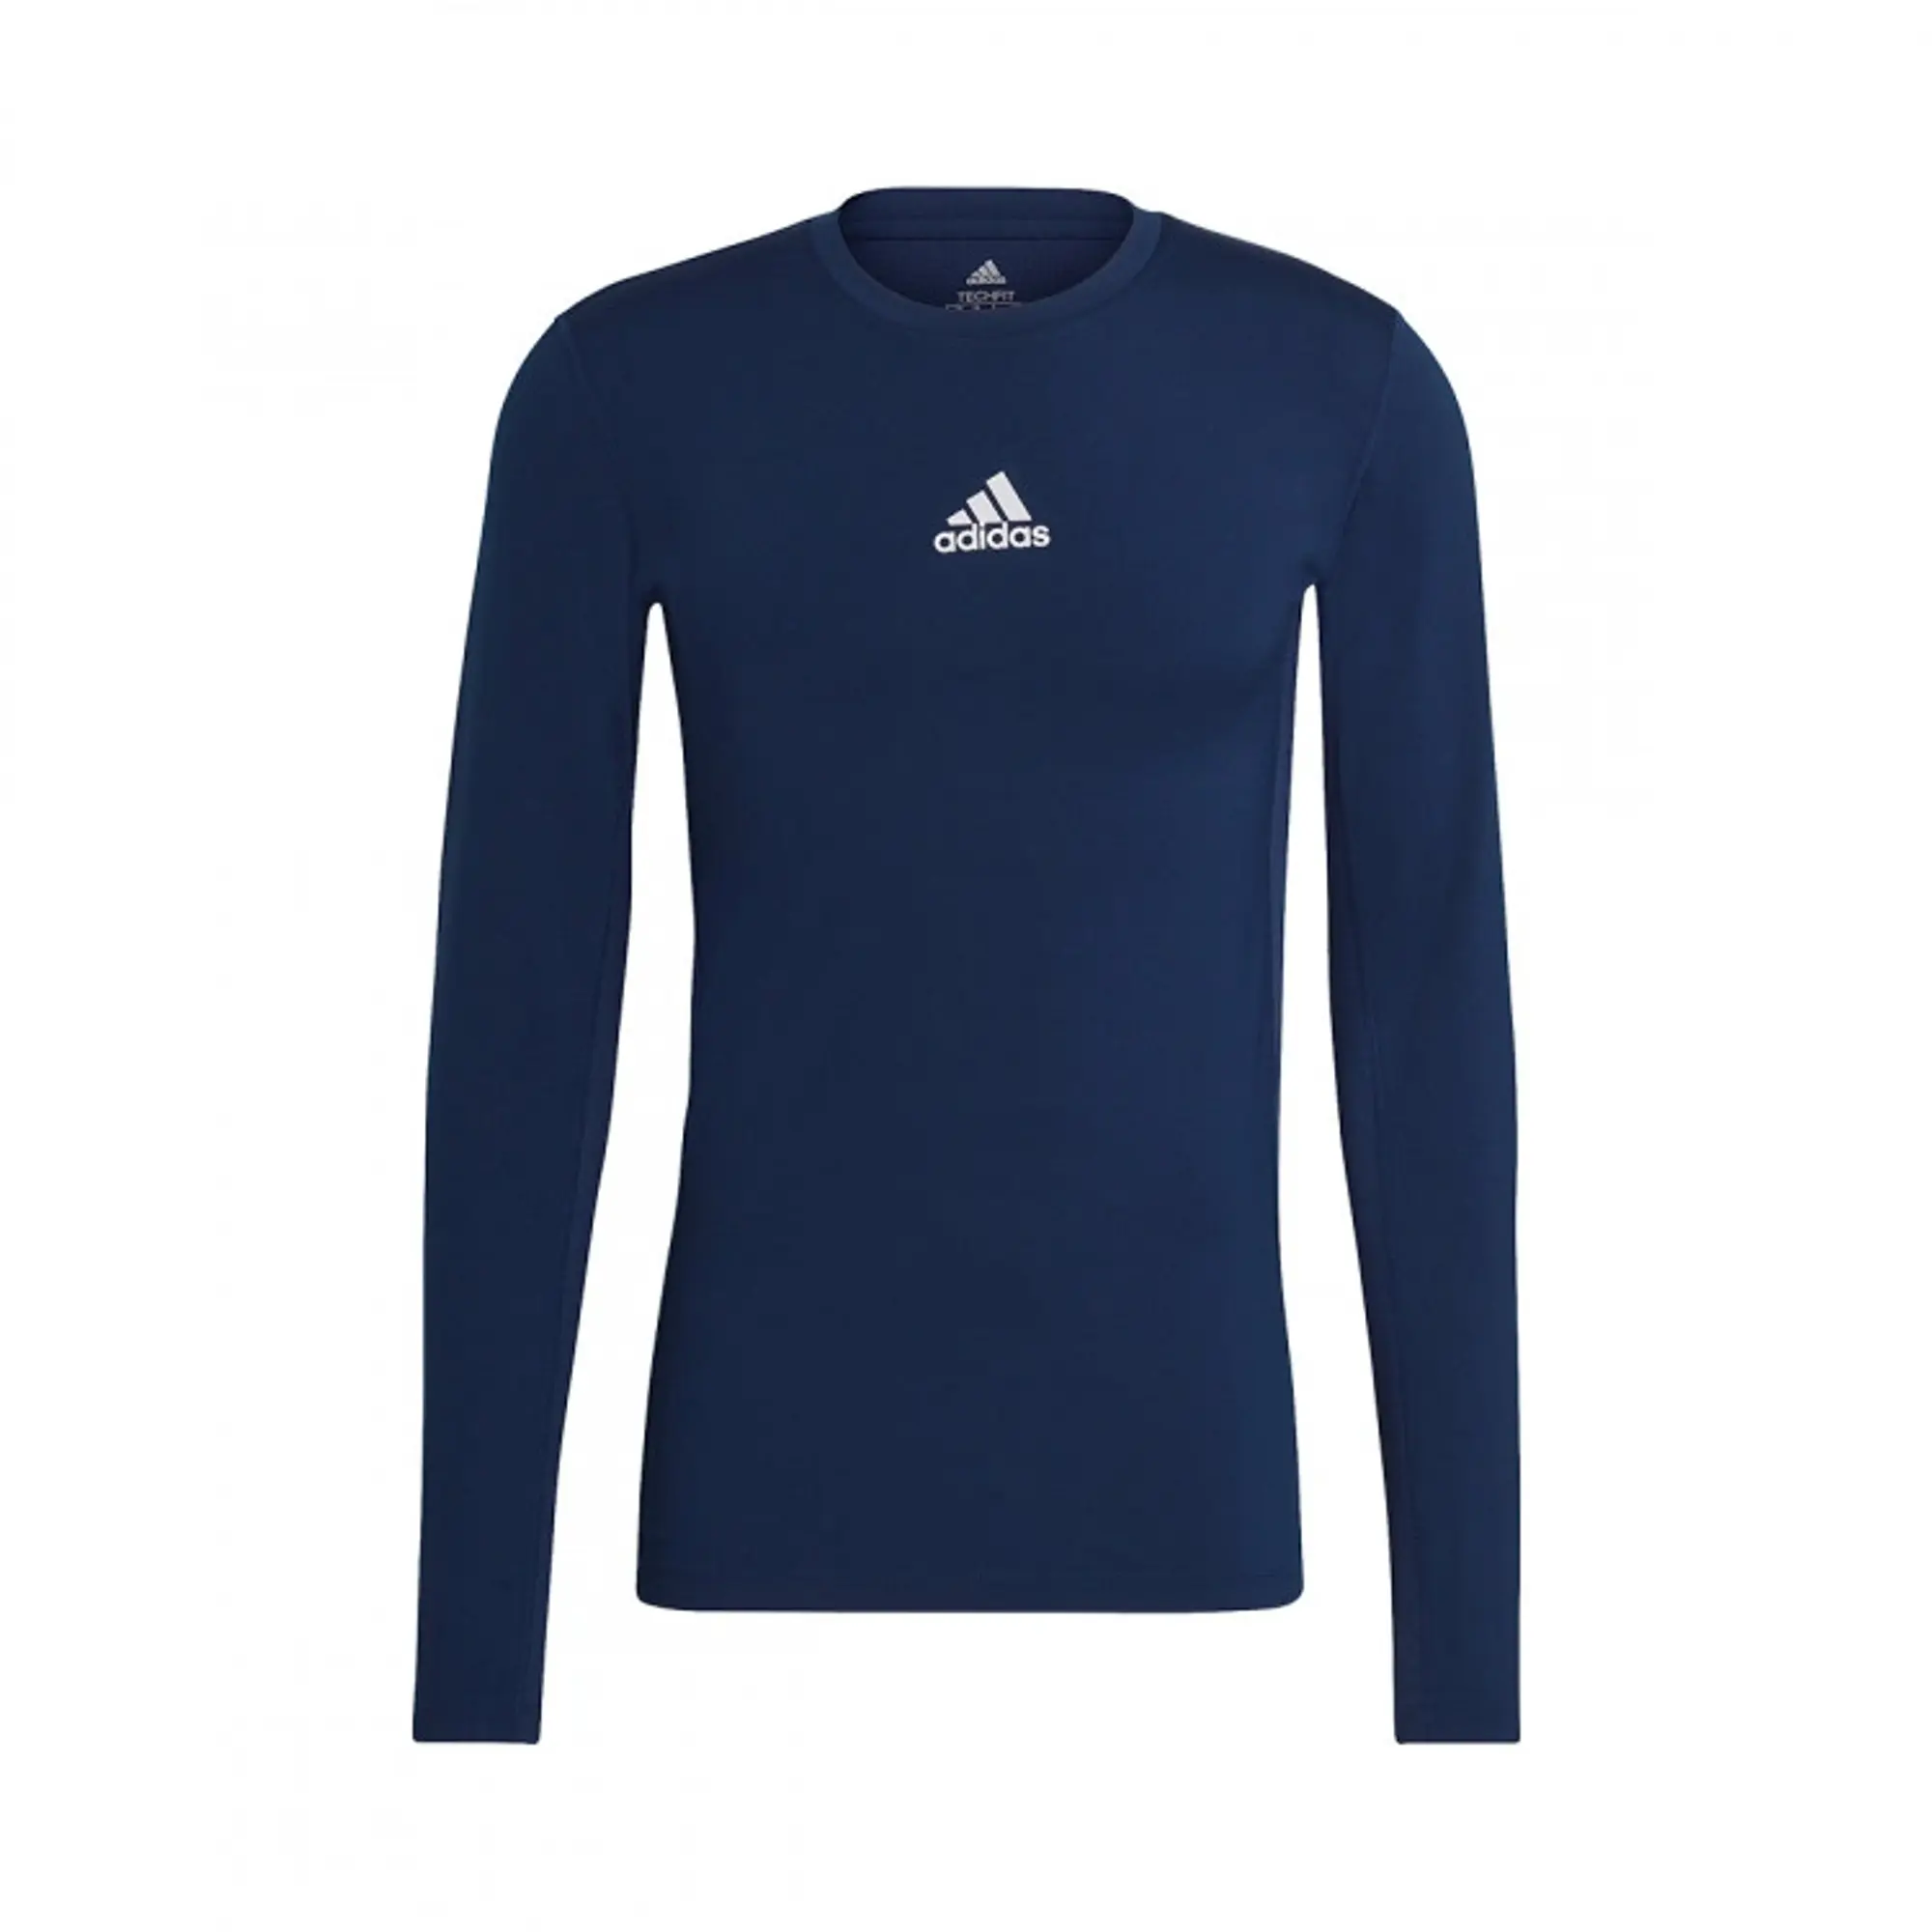 adidas Mens Techfit Compression Top in Navy